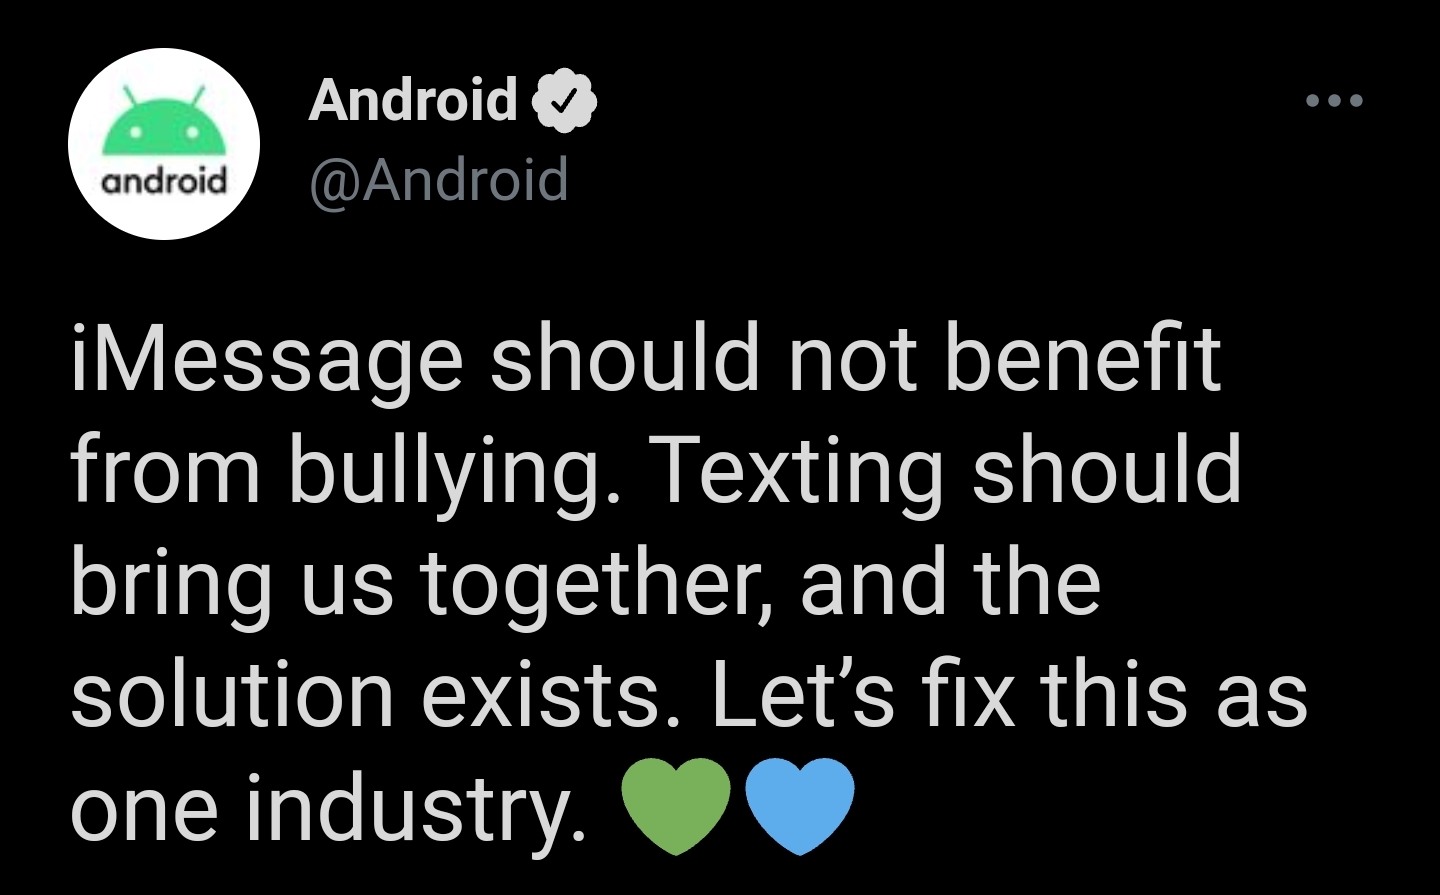 Android Twitter account iMessage